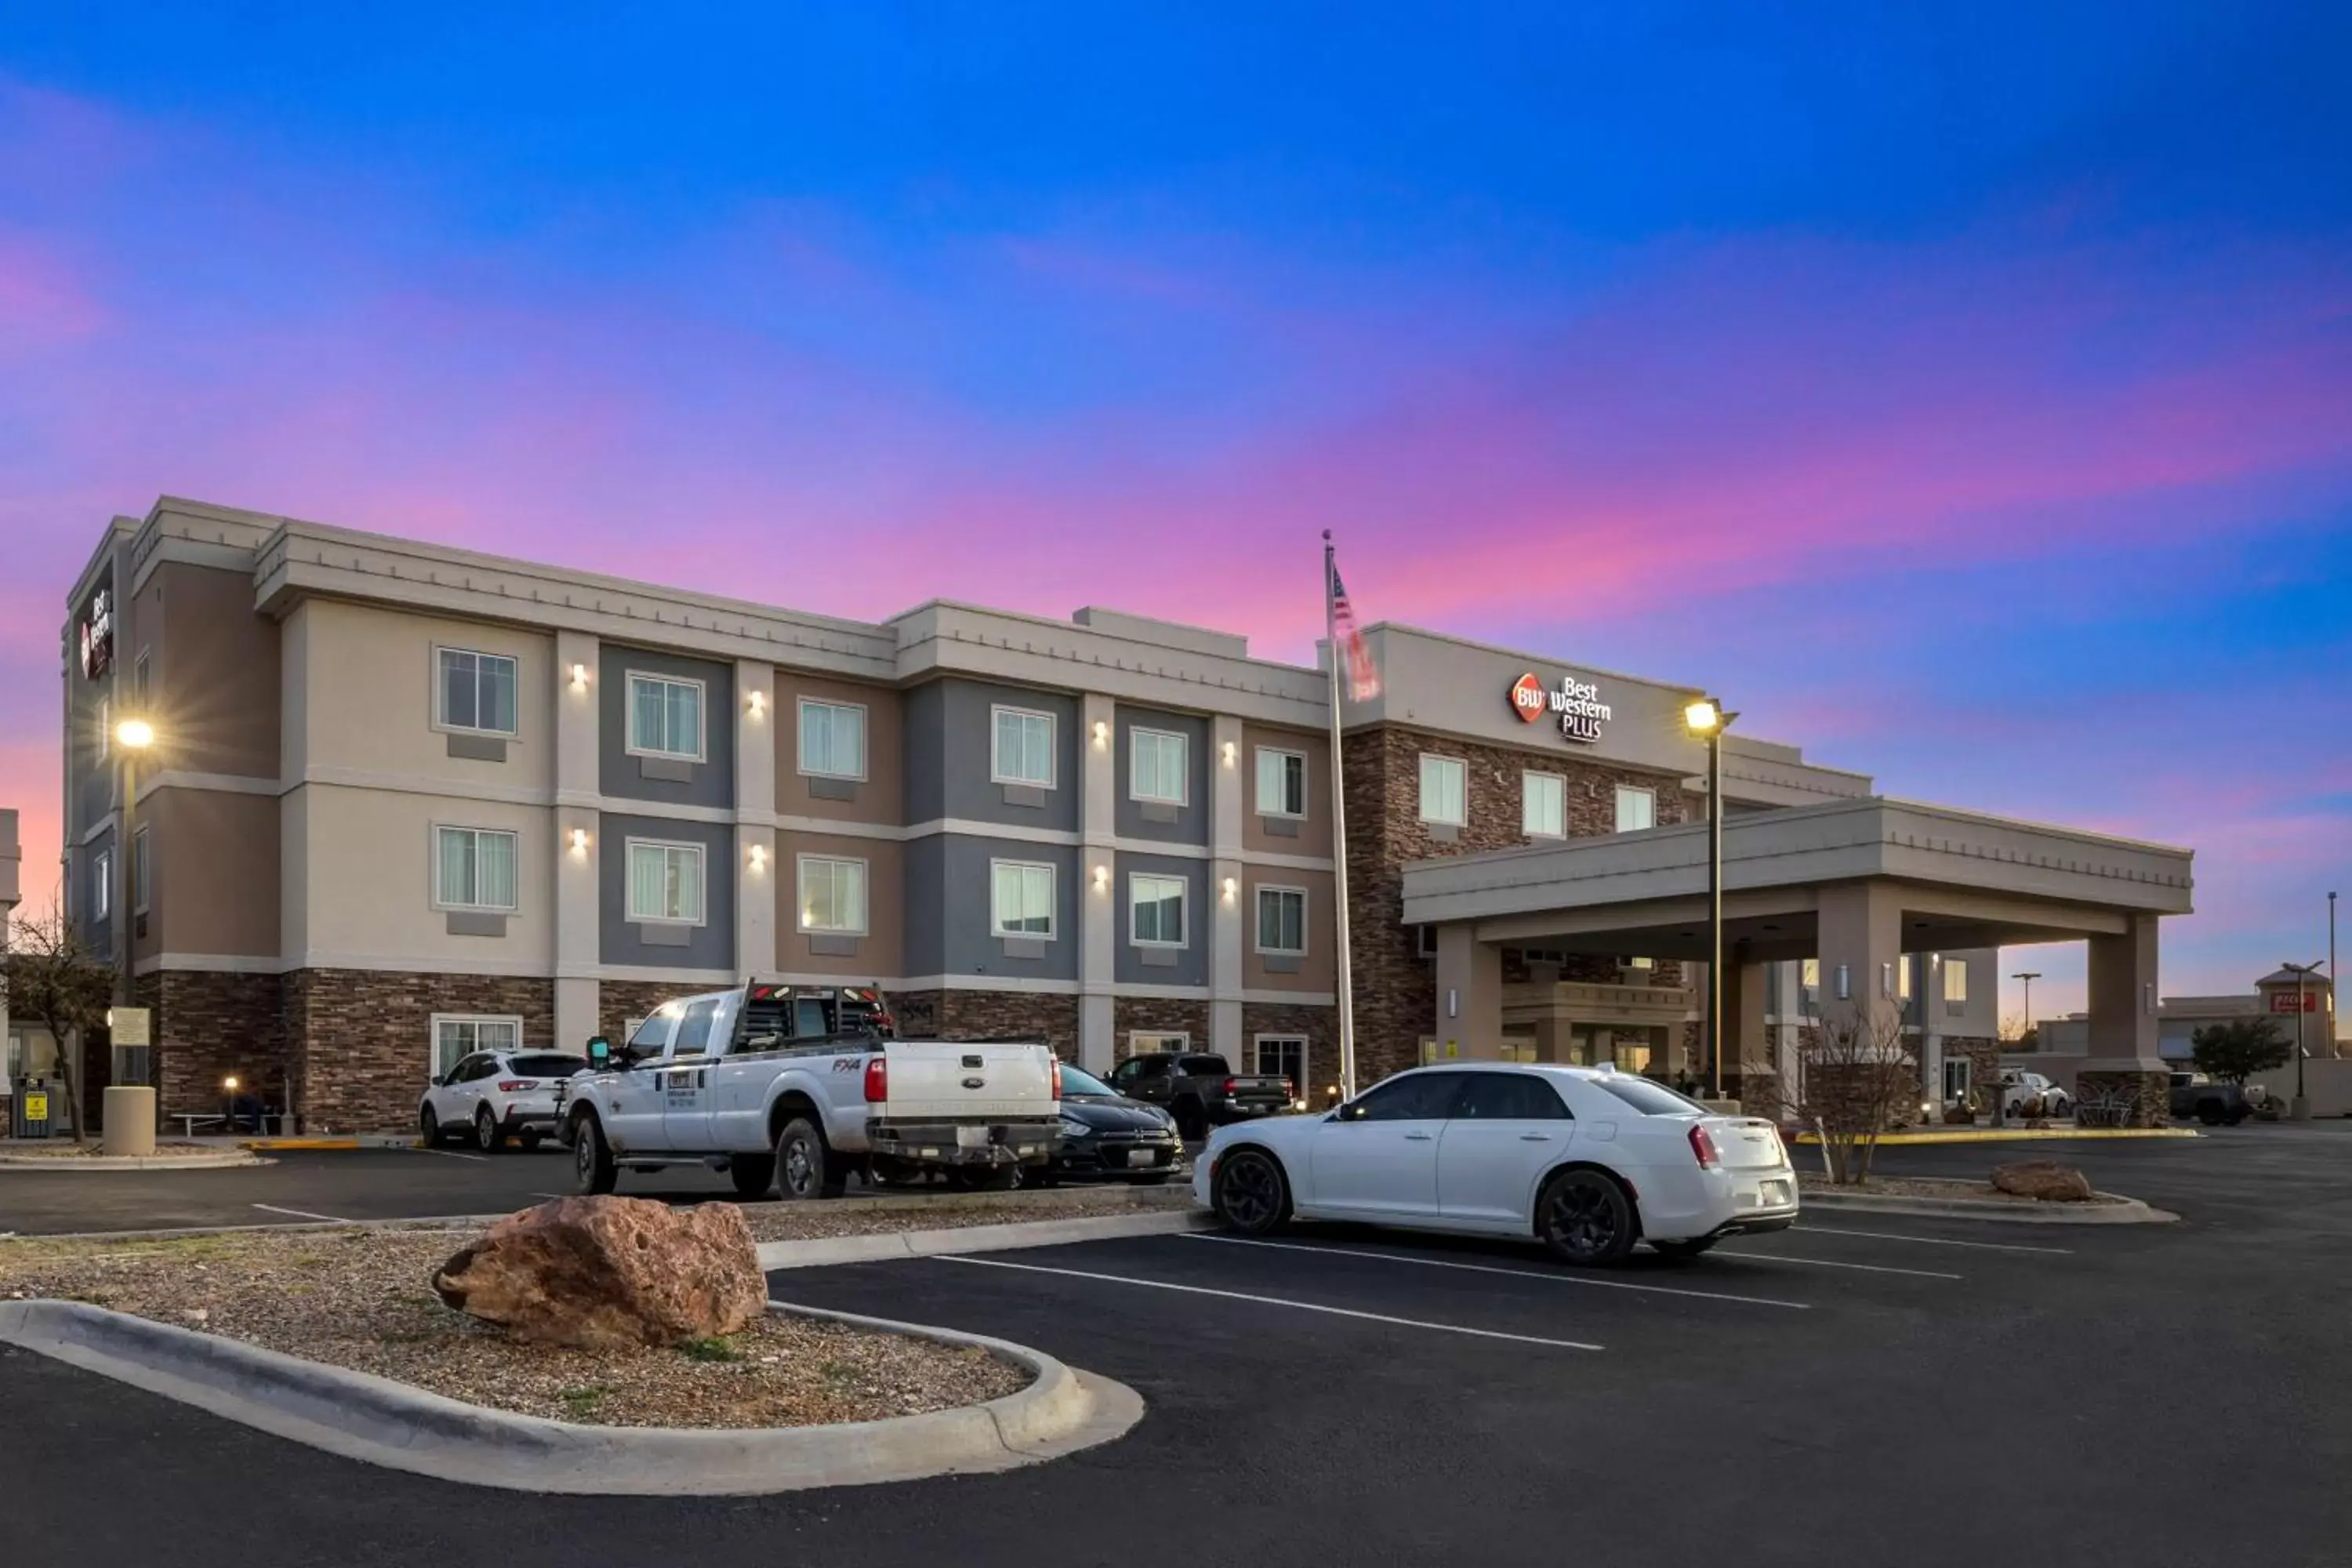 Property Building in Best Western Plus Fort Stockton Hotel